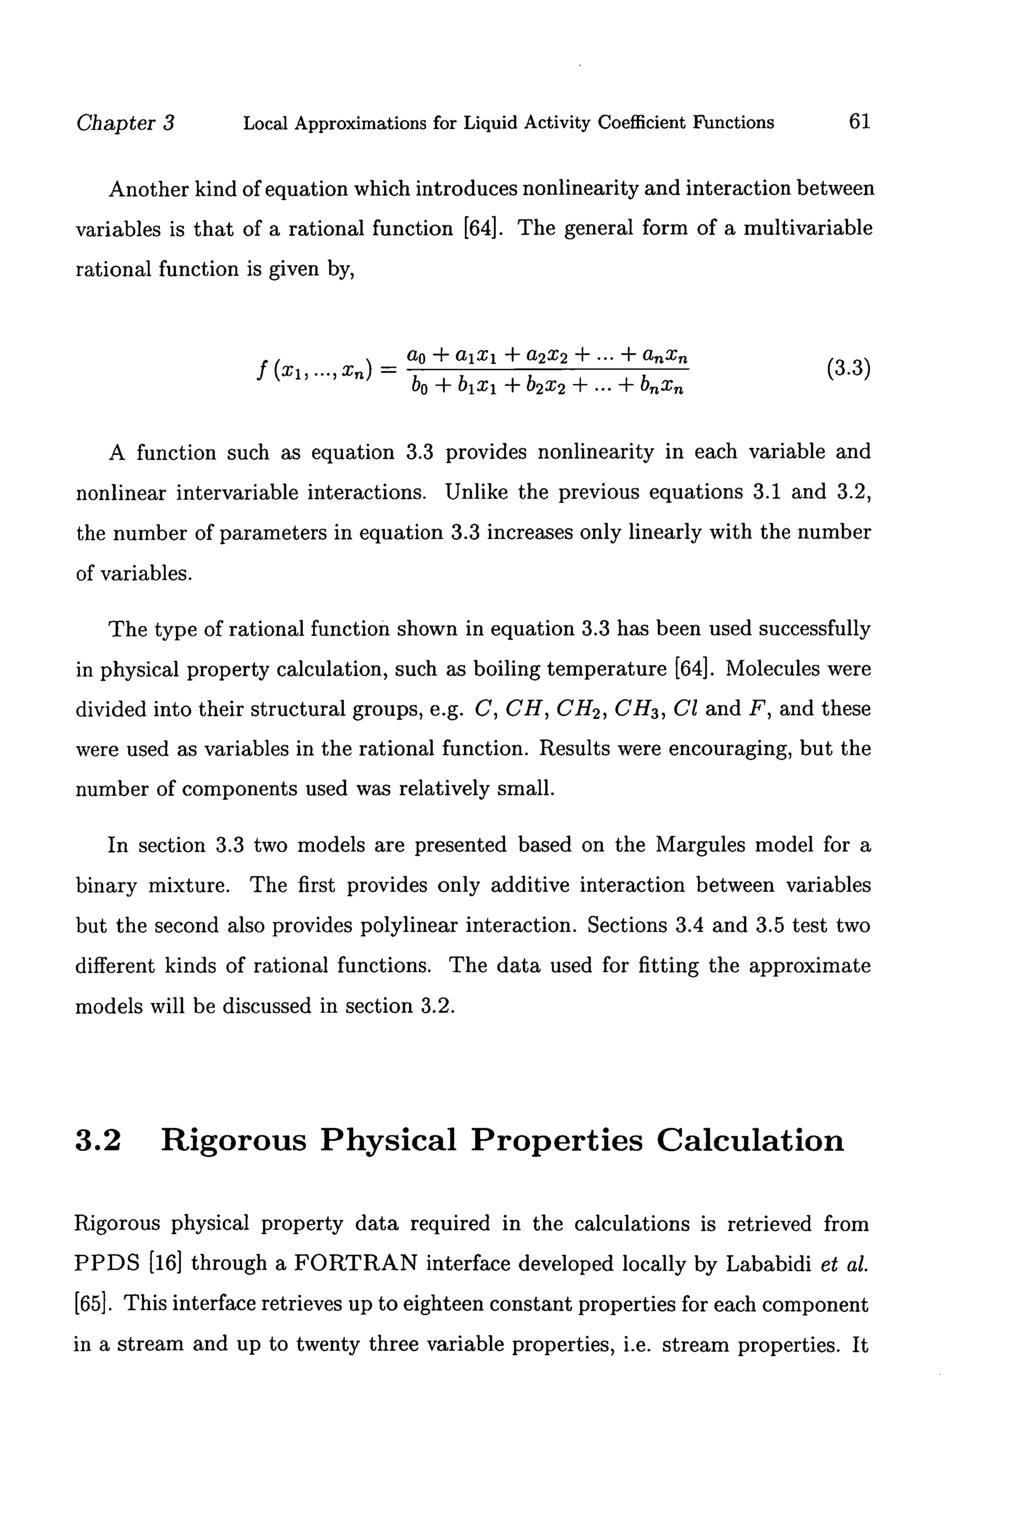 Chapter 3 Local Approximations for Liquid Activity Coefficient Functions 61 Another kind of equation which introduces nonlinearity and interaction between variables is that of a rational function